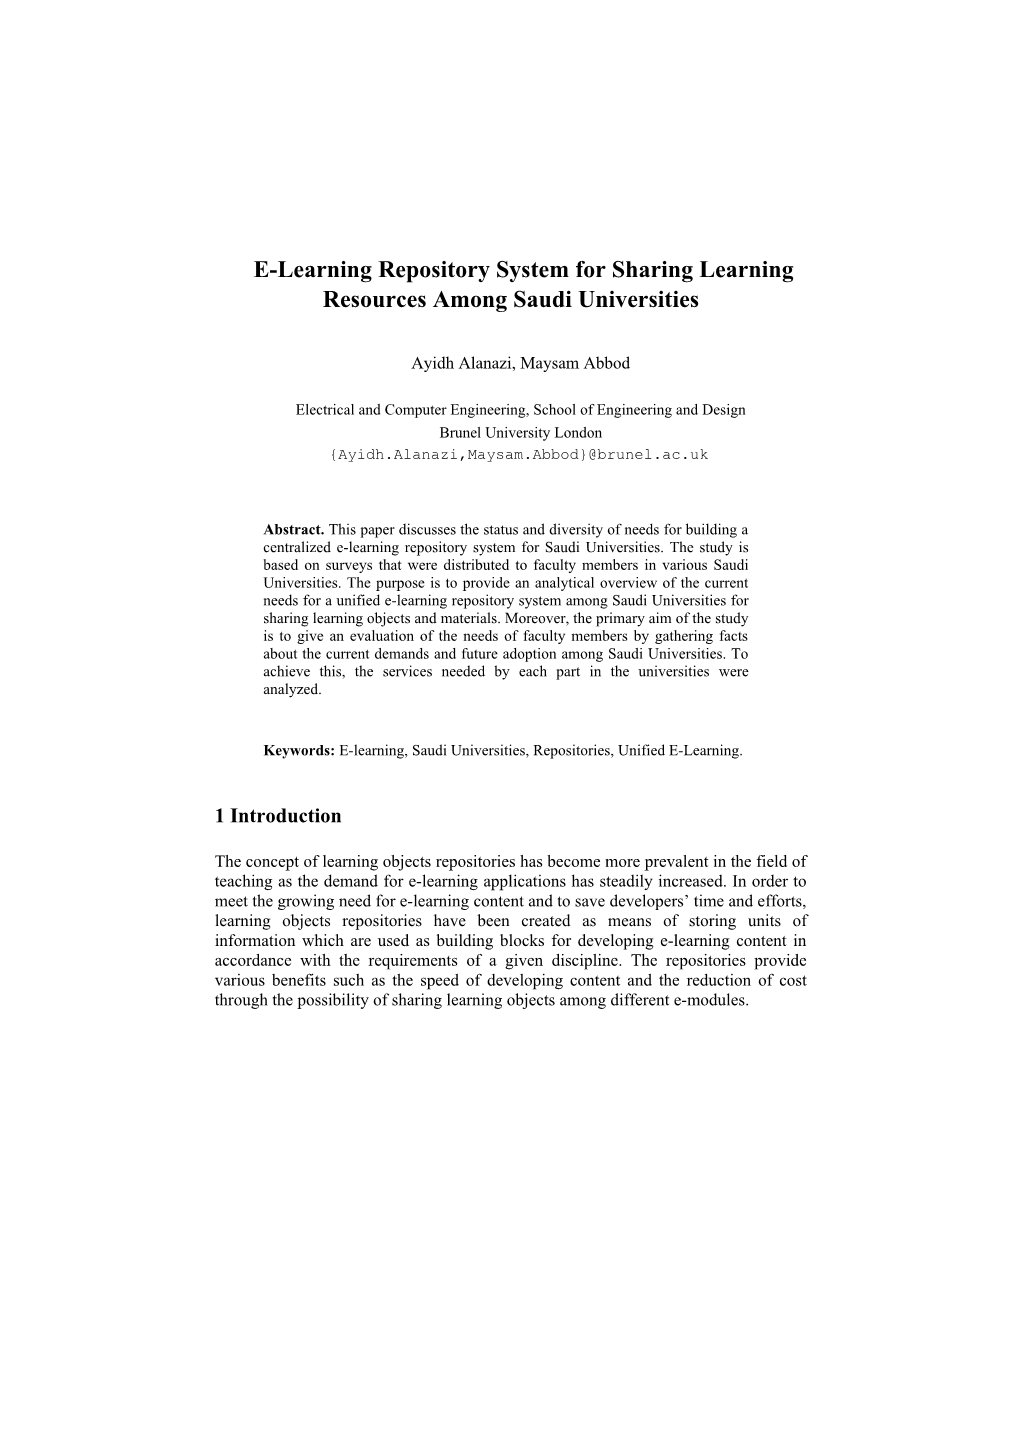 E-Learning Repository System for Sharing Learning Resources Among Saudi Universities